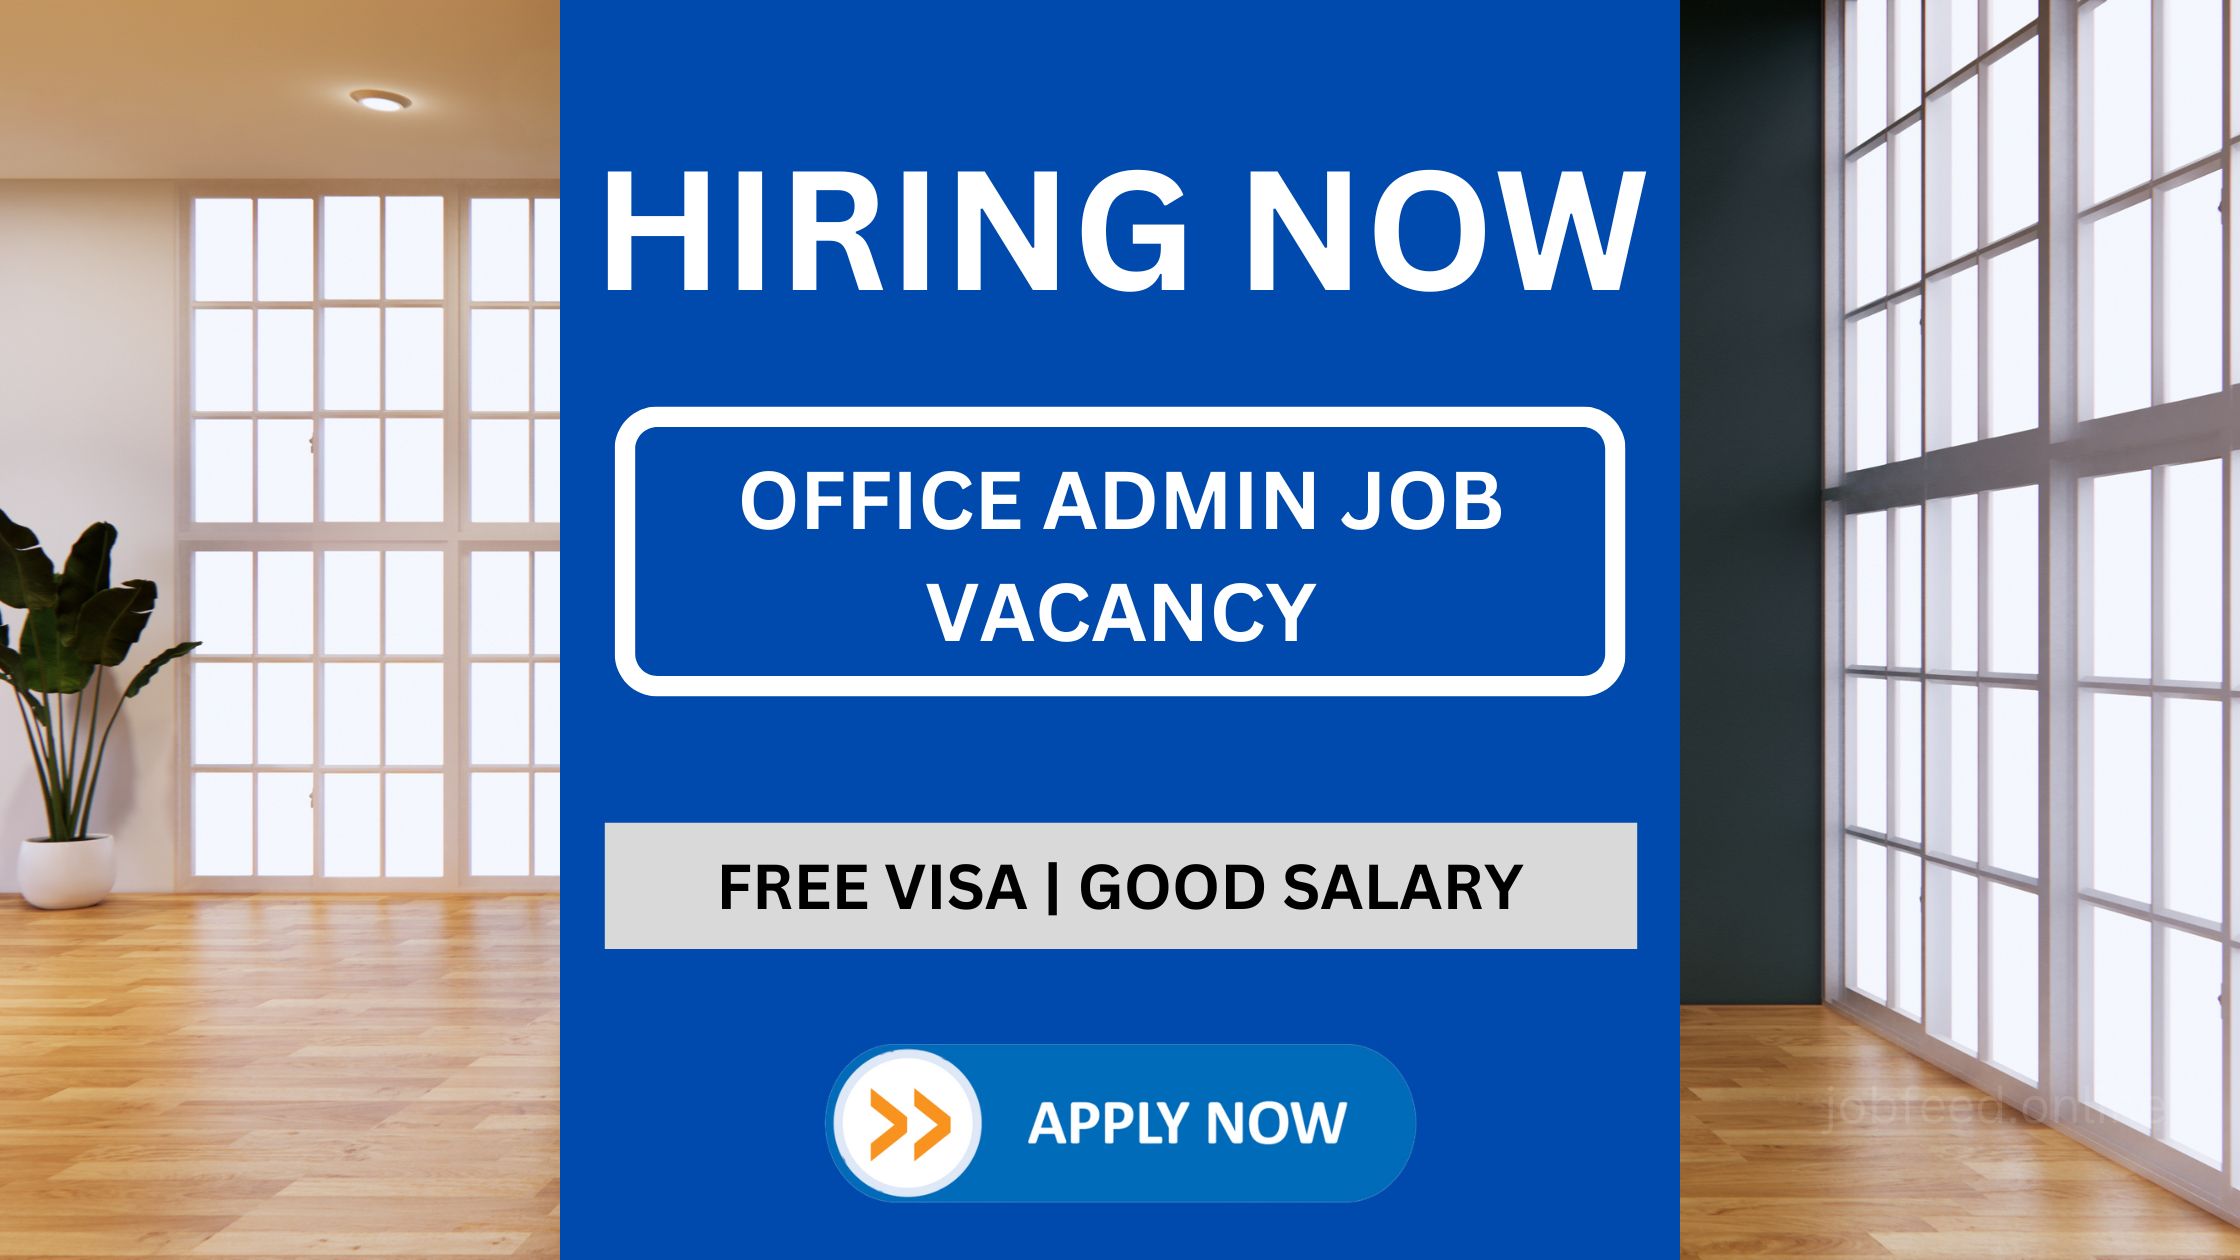 Office Admin Job Vacancy - Contact Number Given